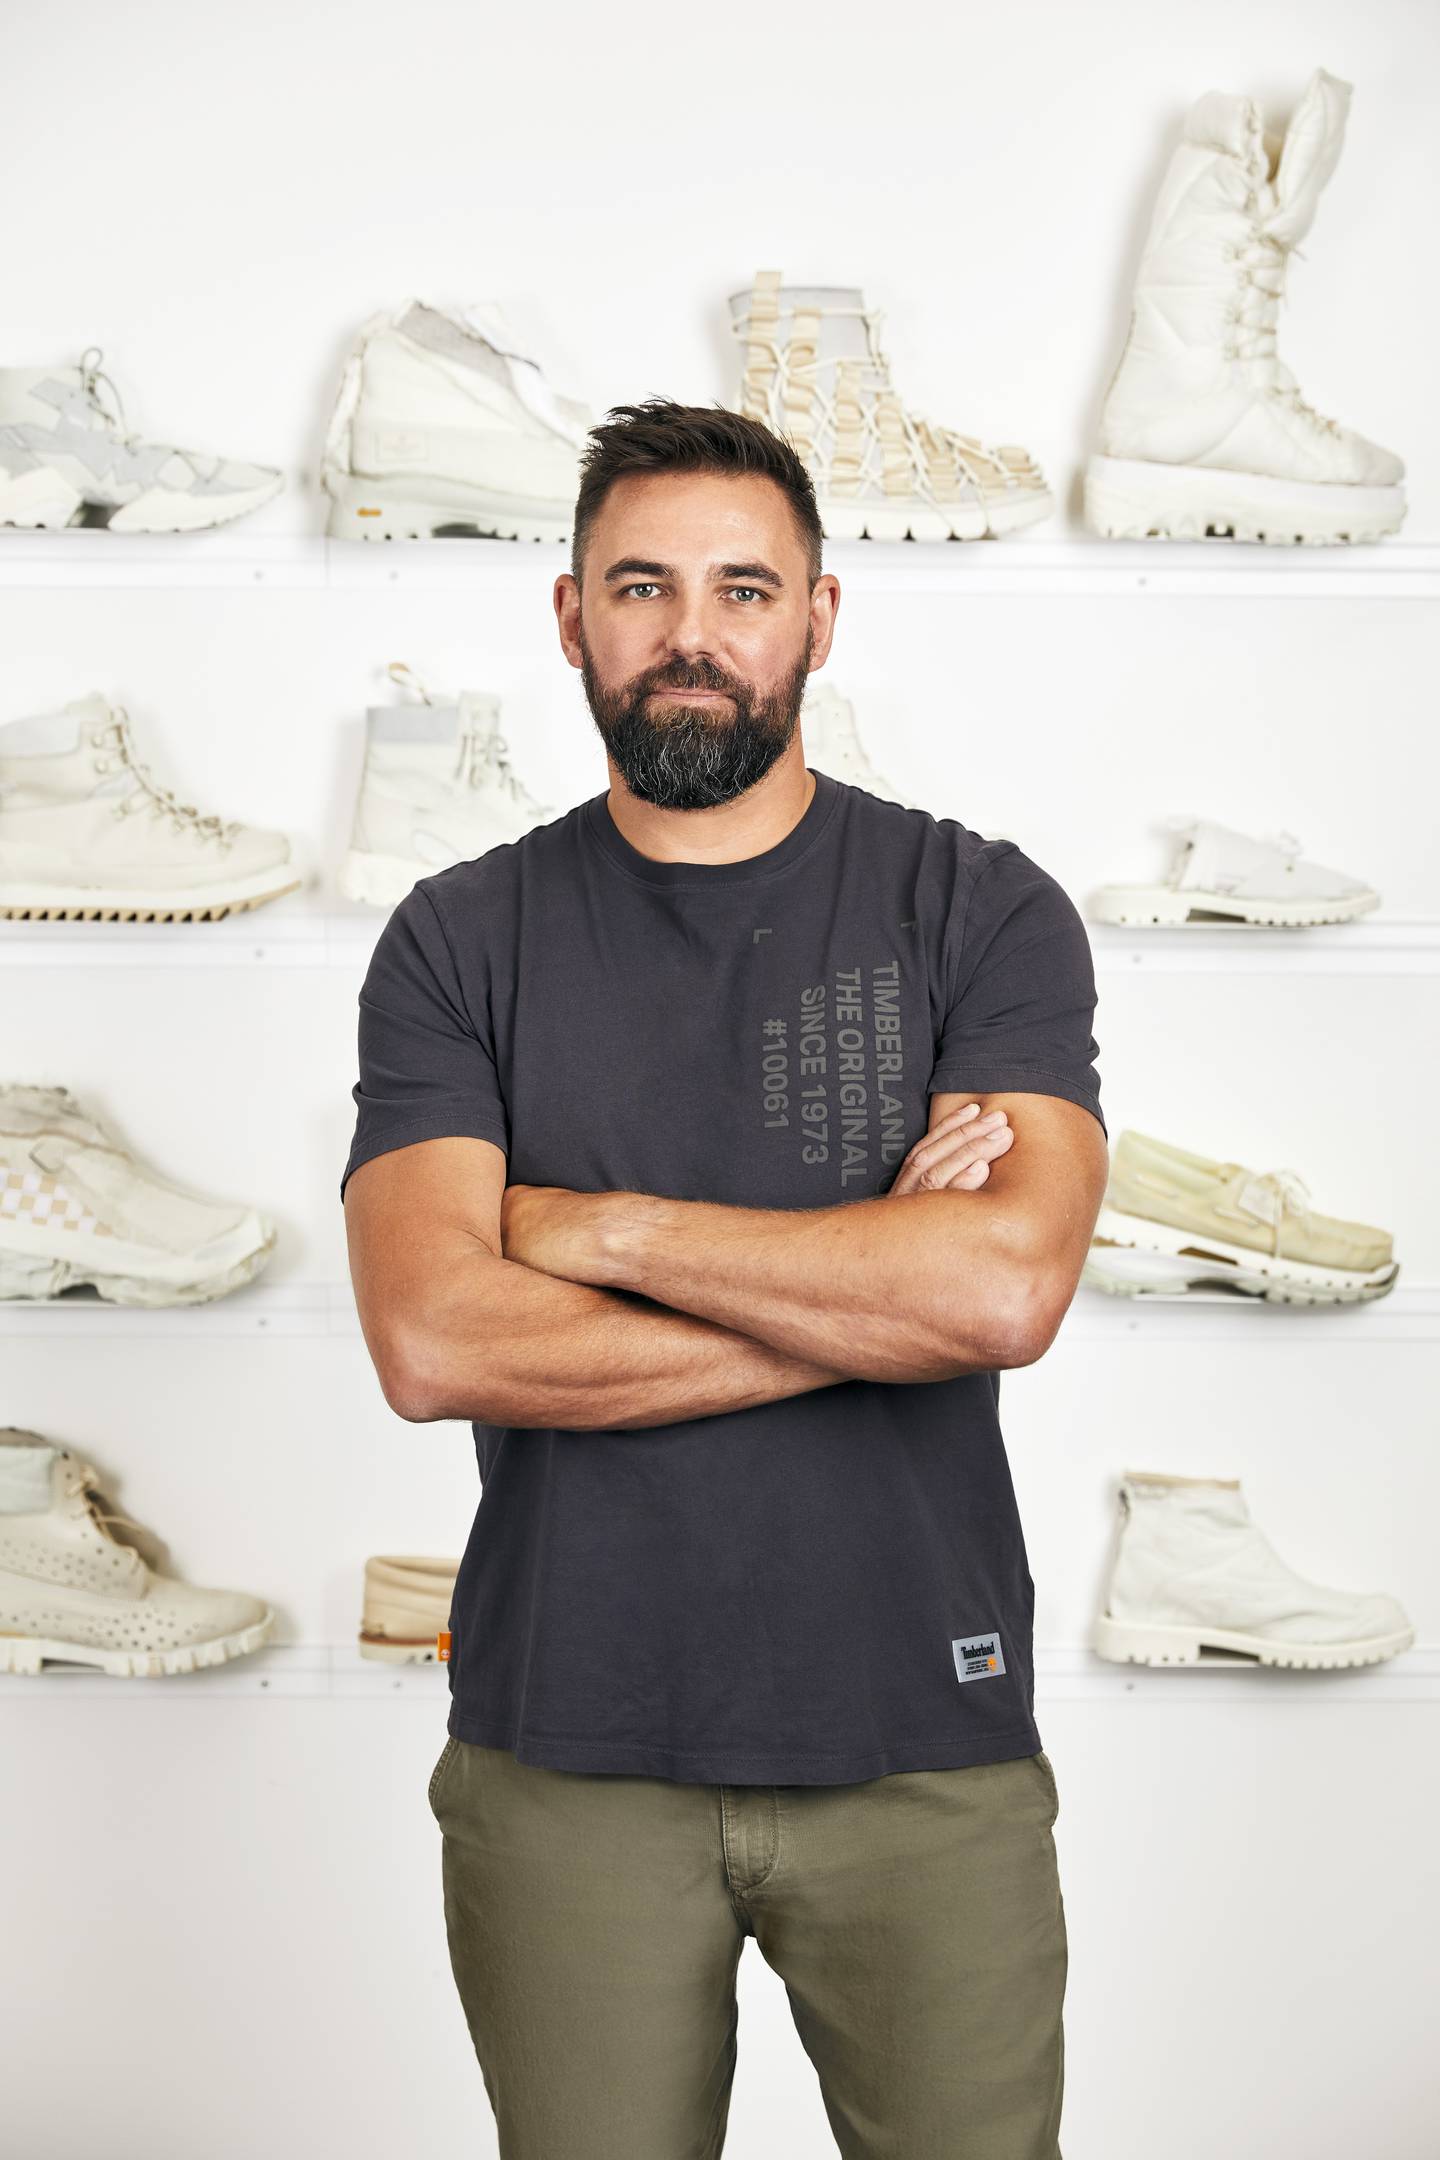 Chris McGrath is the vice president of product design and innovation at Timberland.